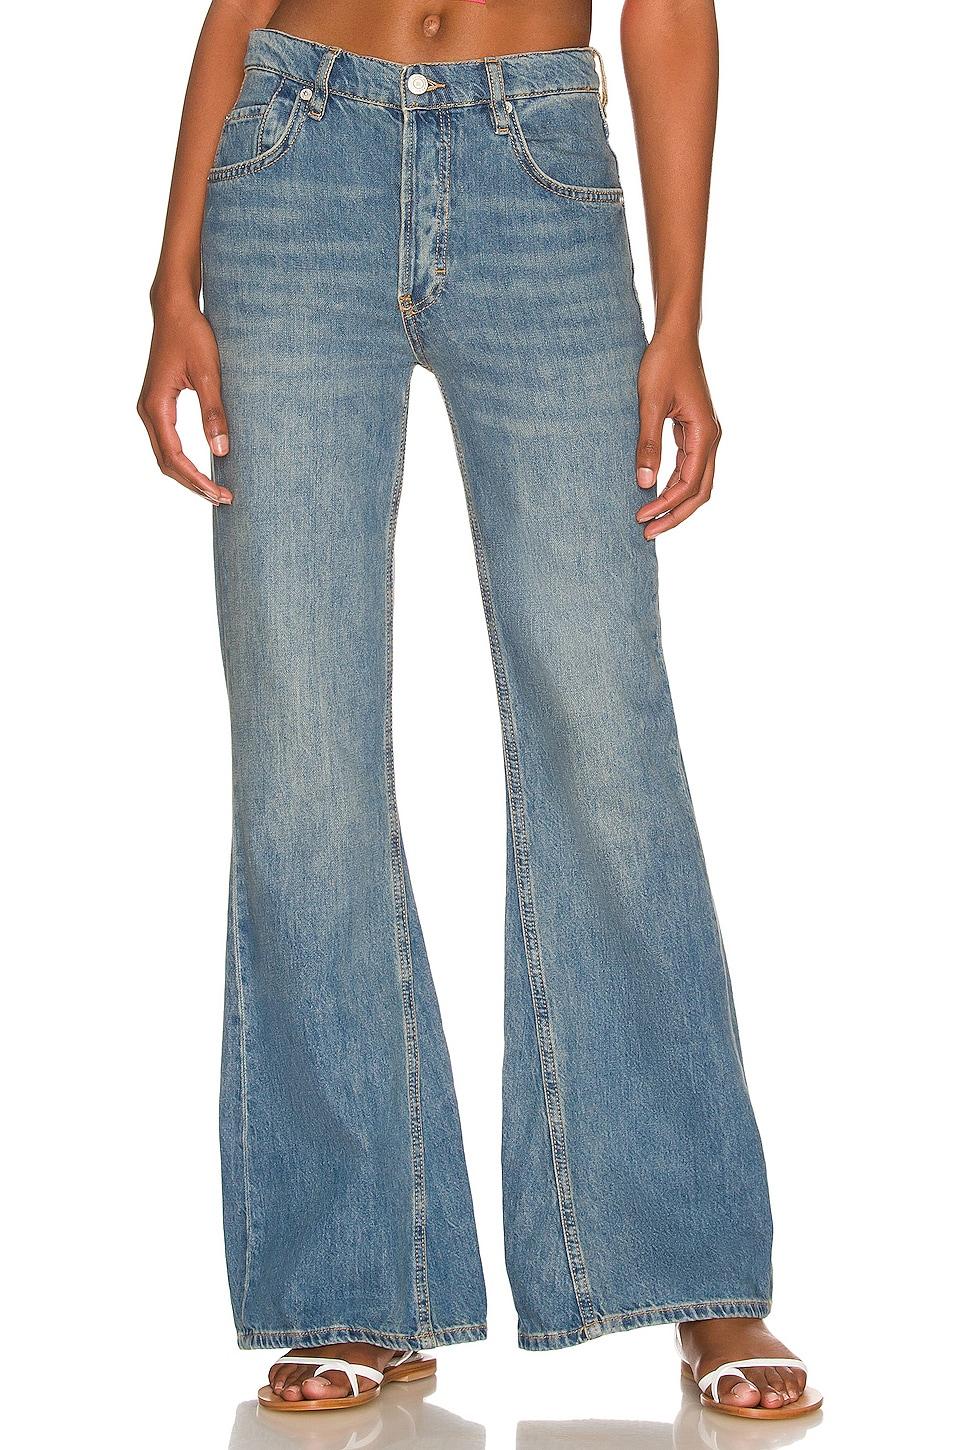 Womens Clothing Jeans Flare and bell bottom jeans Free People Denim New Dawn Rip Detail Flares in Blue 